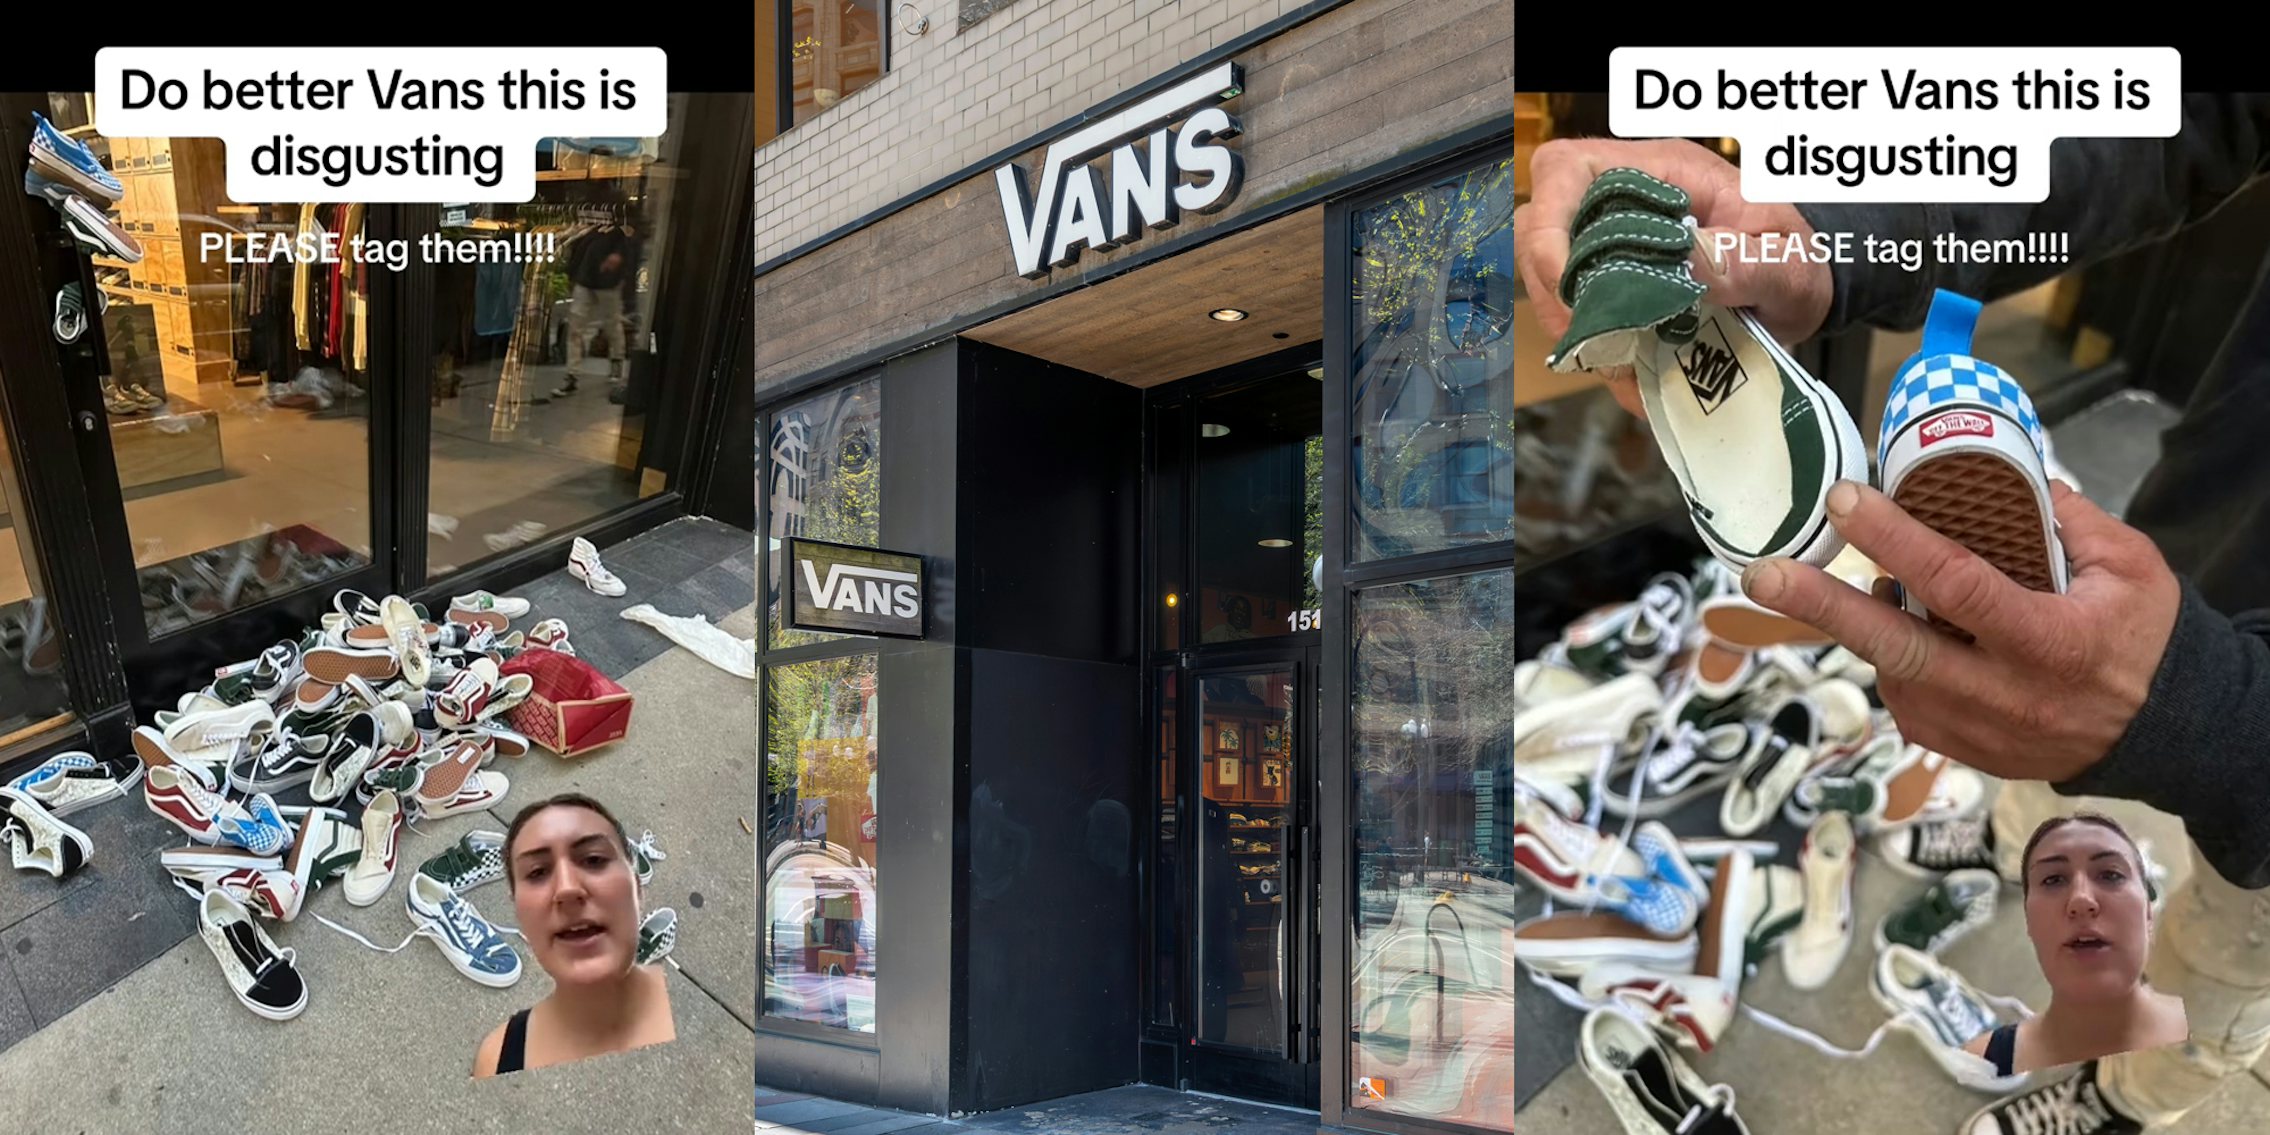 woman greenscreen TikTok over image of Vans shoes outside storefront with caption 'Do better Vans this is disgusting PLEASE tag them!!!!' (l) Vans store with signs (c) woman greenscreen TikTok over image of Vans shoes slashed in hands outside storefront with caption 'Do better Vans this is disgusting PLEASE tag them!!!!' (r)